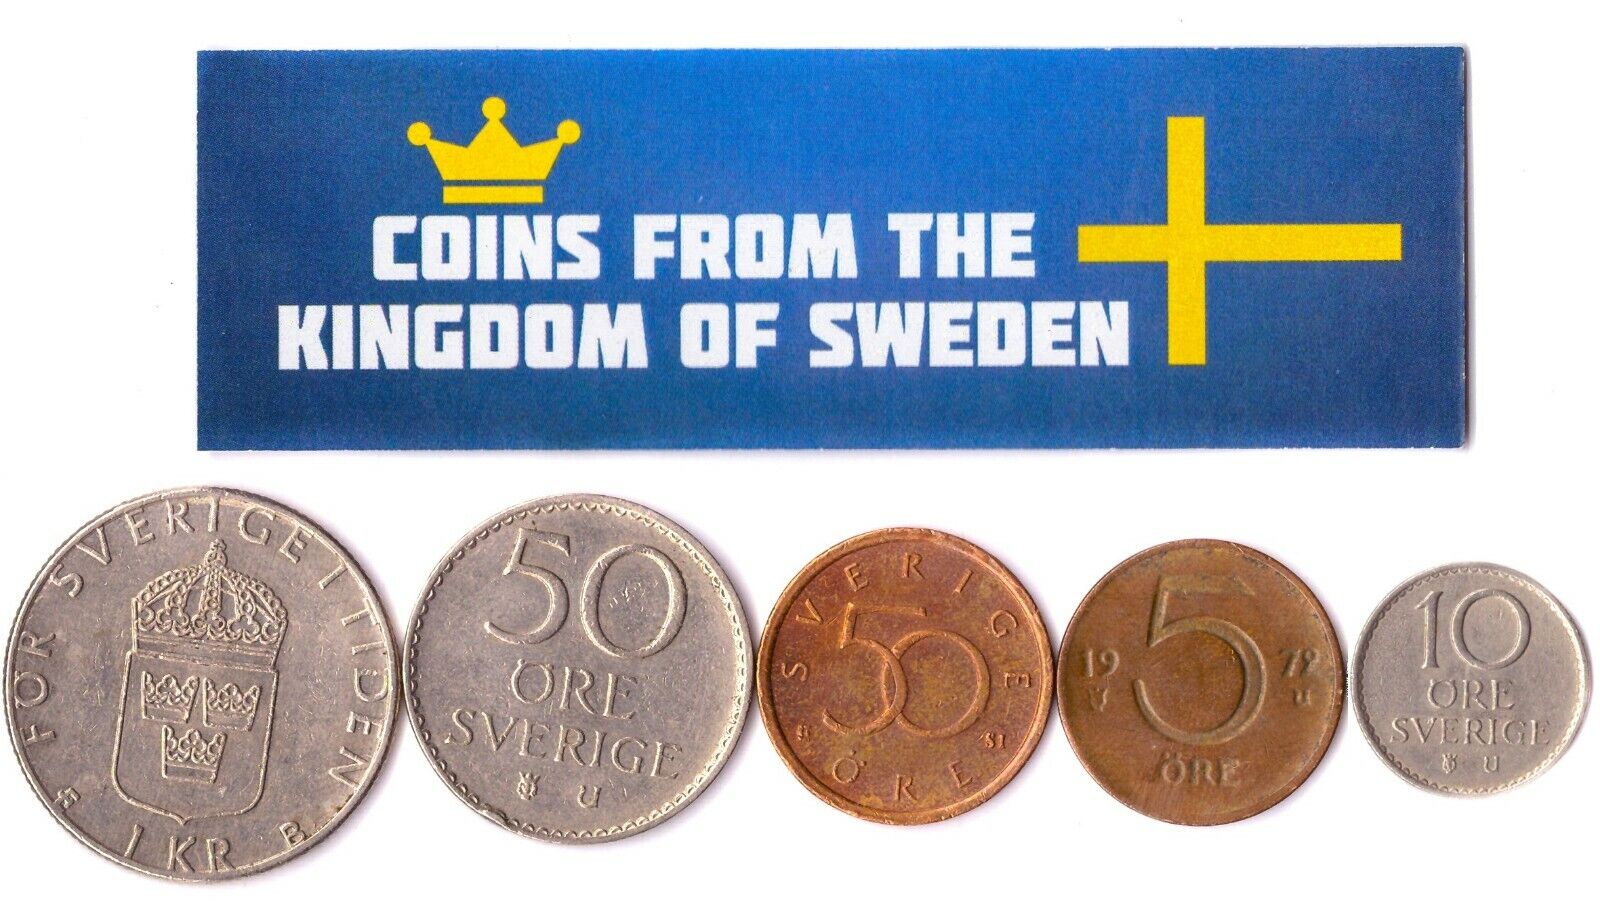 5 SWEDISH COINS DIFFERENT EUROPEAN COINS FOREIGN CURRENCY, VALUABLE MONEY Без бренда - фотография #2